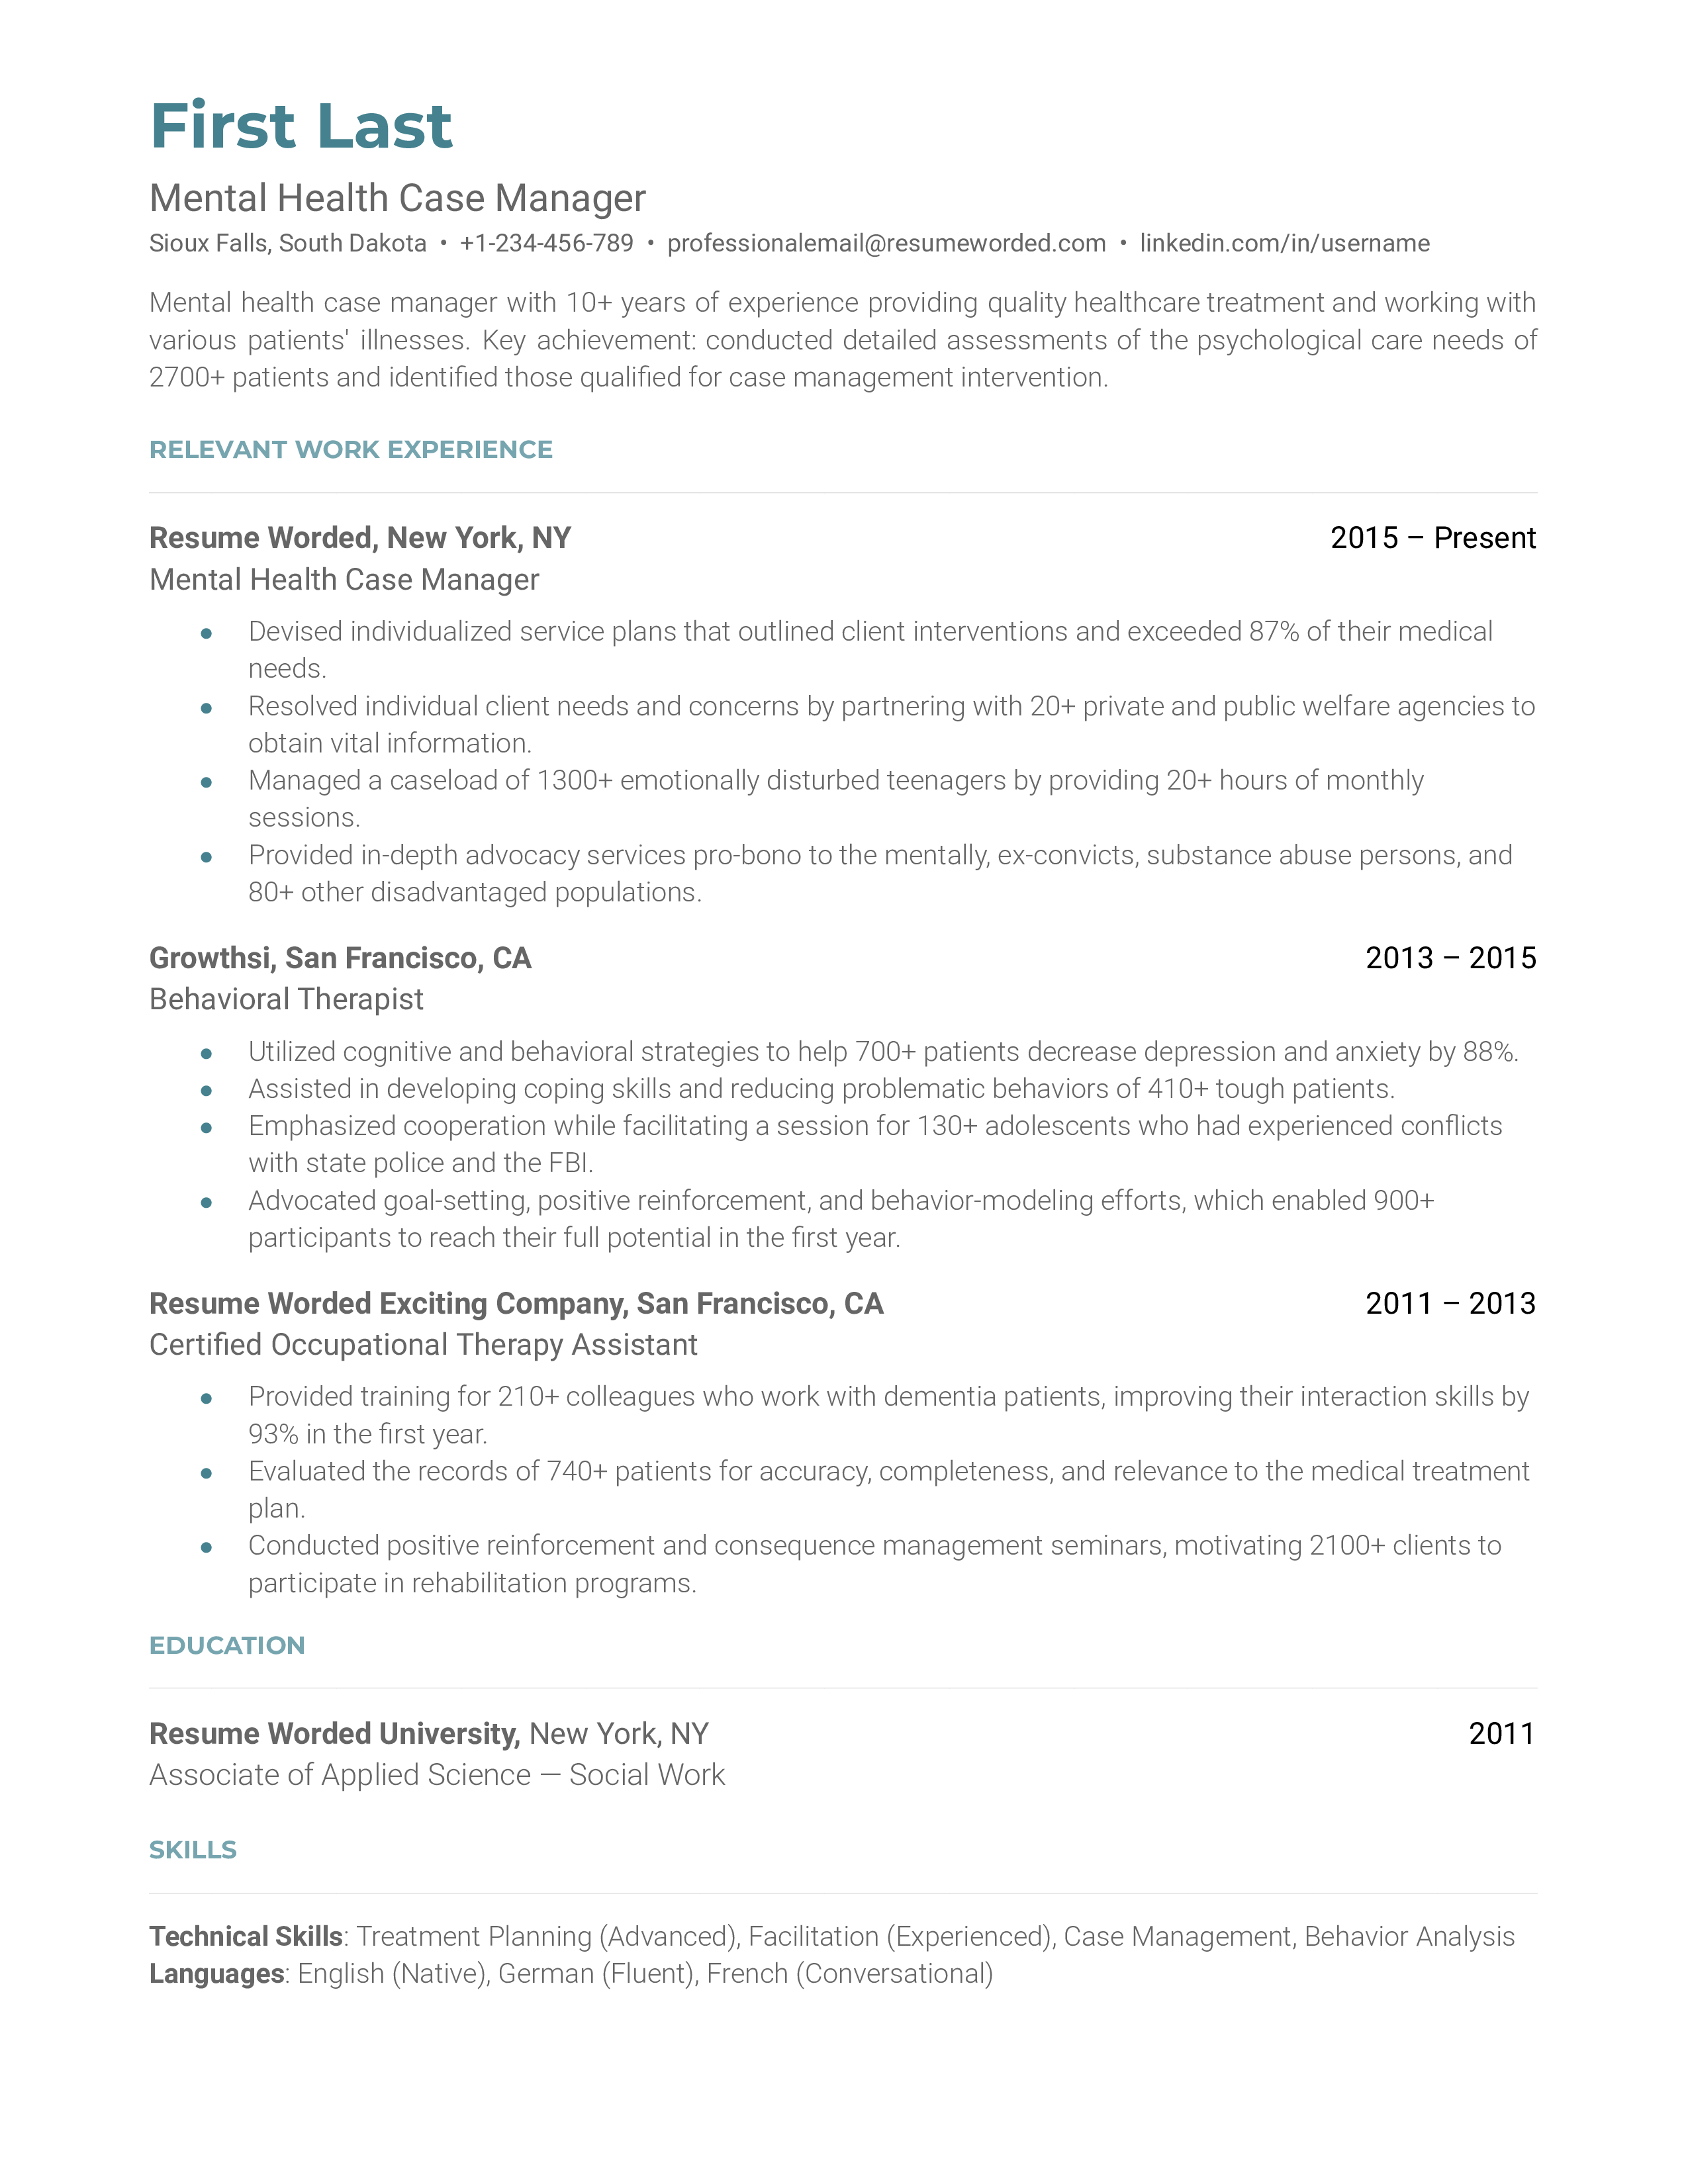 resume examples for mental health professionals